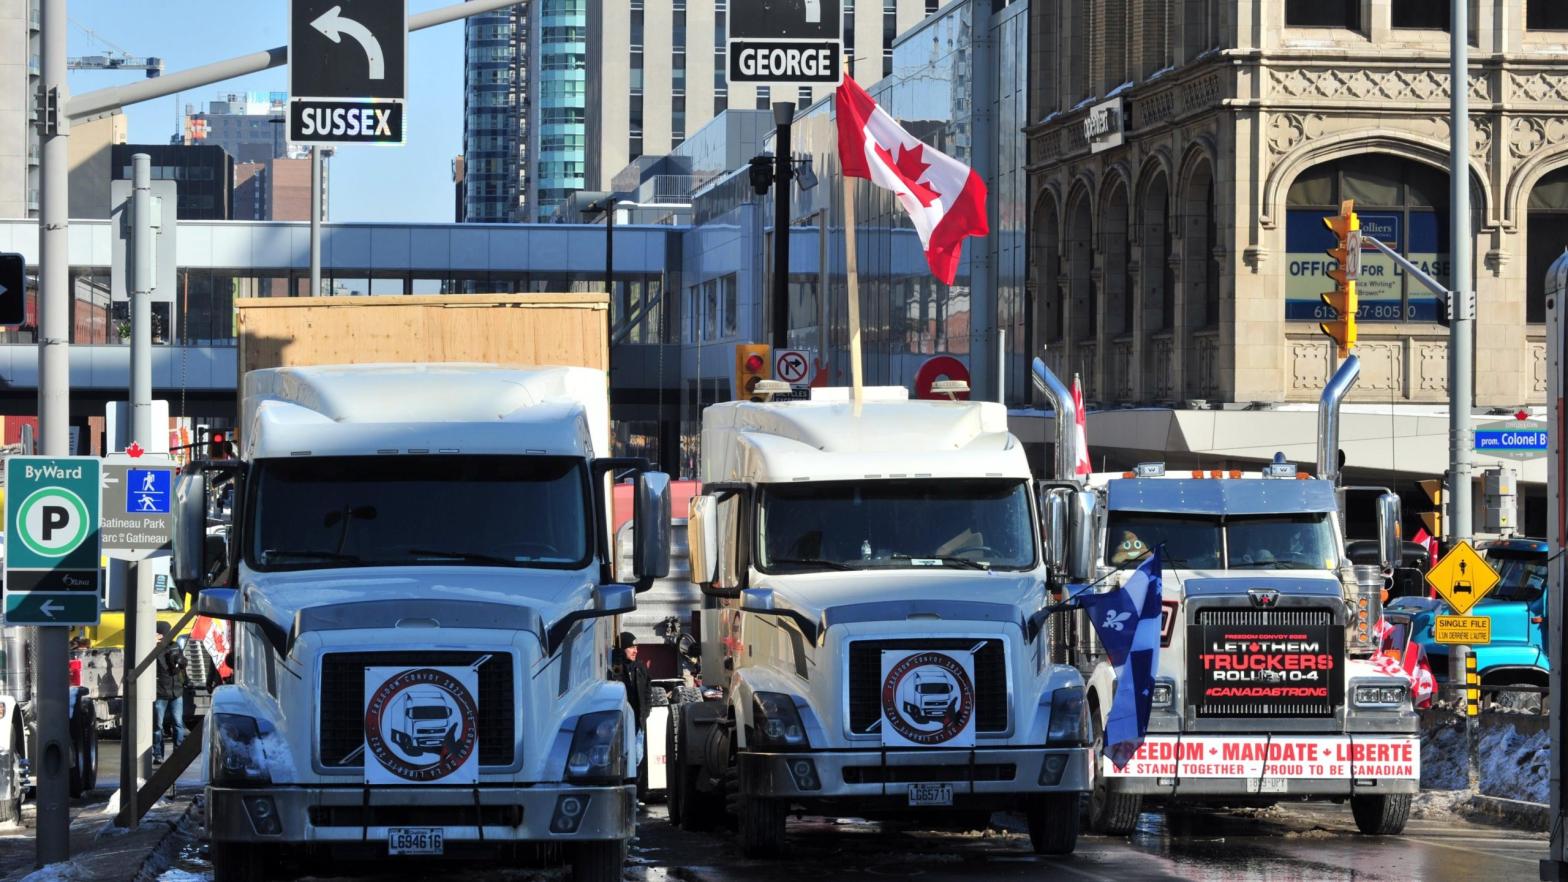 Truckers with the 'Freedom Convoy' assembled near the Parliament of Canada in downtown Ottawa on Feb. 7, 2022. (Photo: Kadri Mohamed / Anadolu Agency via Getty Images, Getty Images)